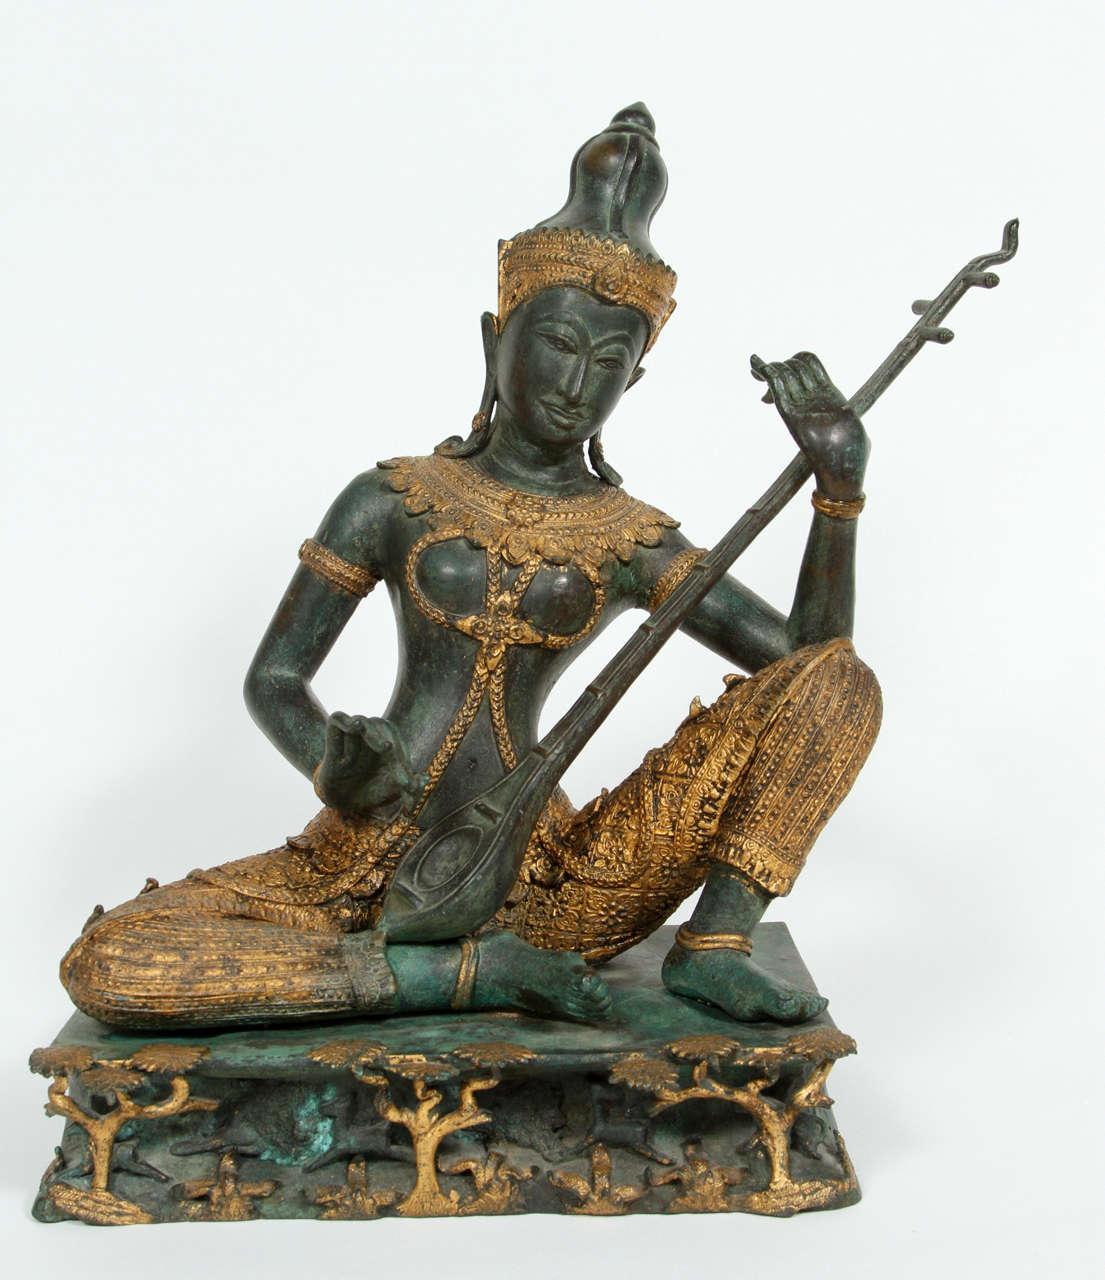 Large Bronze statue of Prince Pra Apai Manee playing a traditional Asian string instrument called 